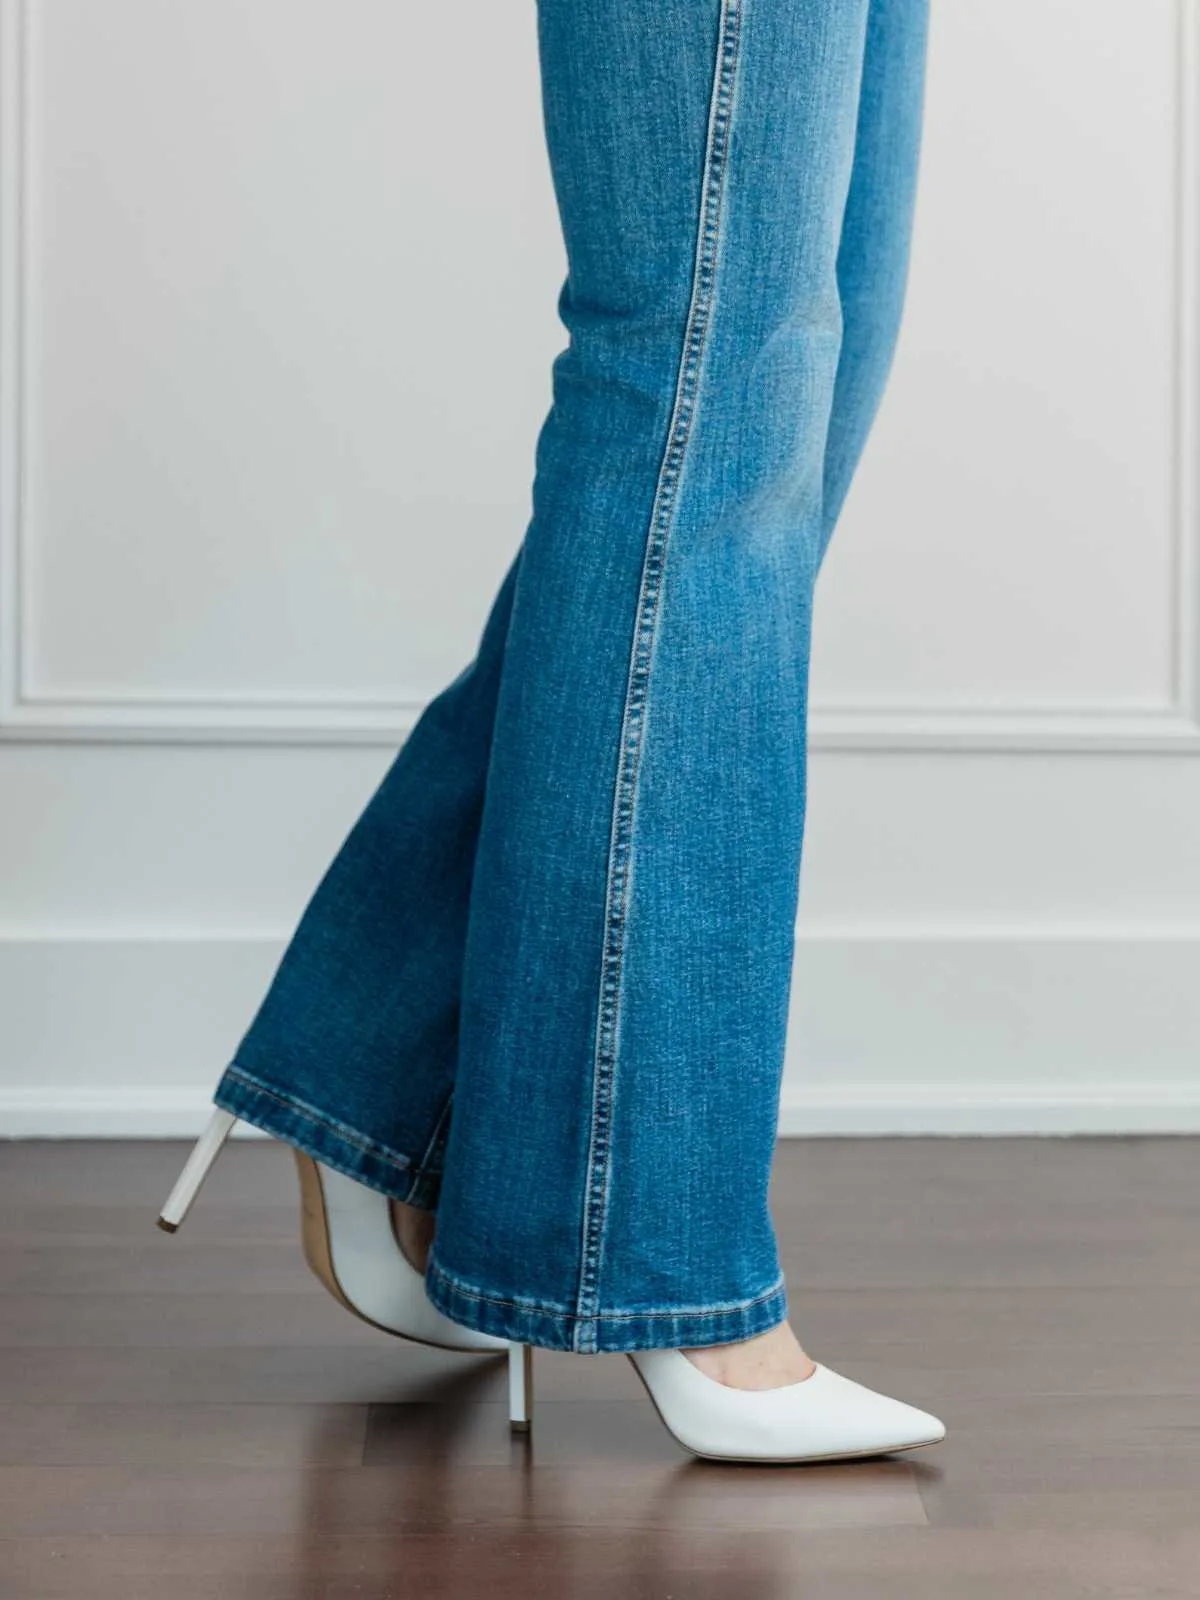 Cropped view of woman's legs wearing  white pumps with full length blue flare jeans.